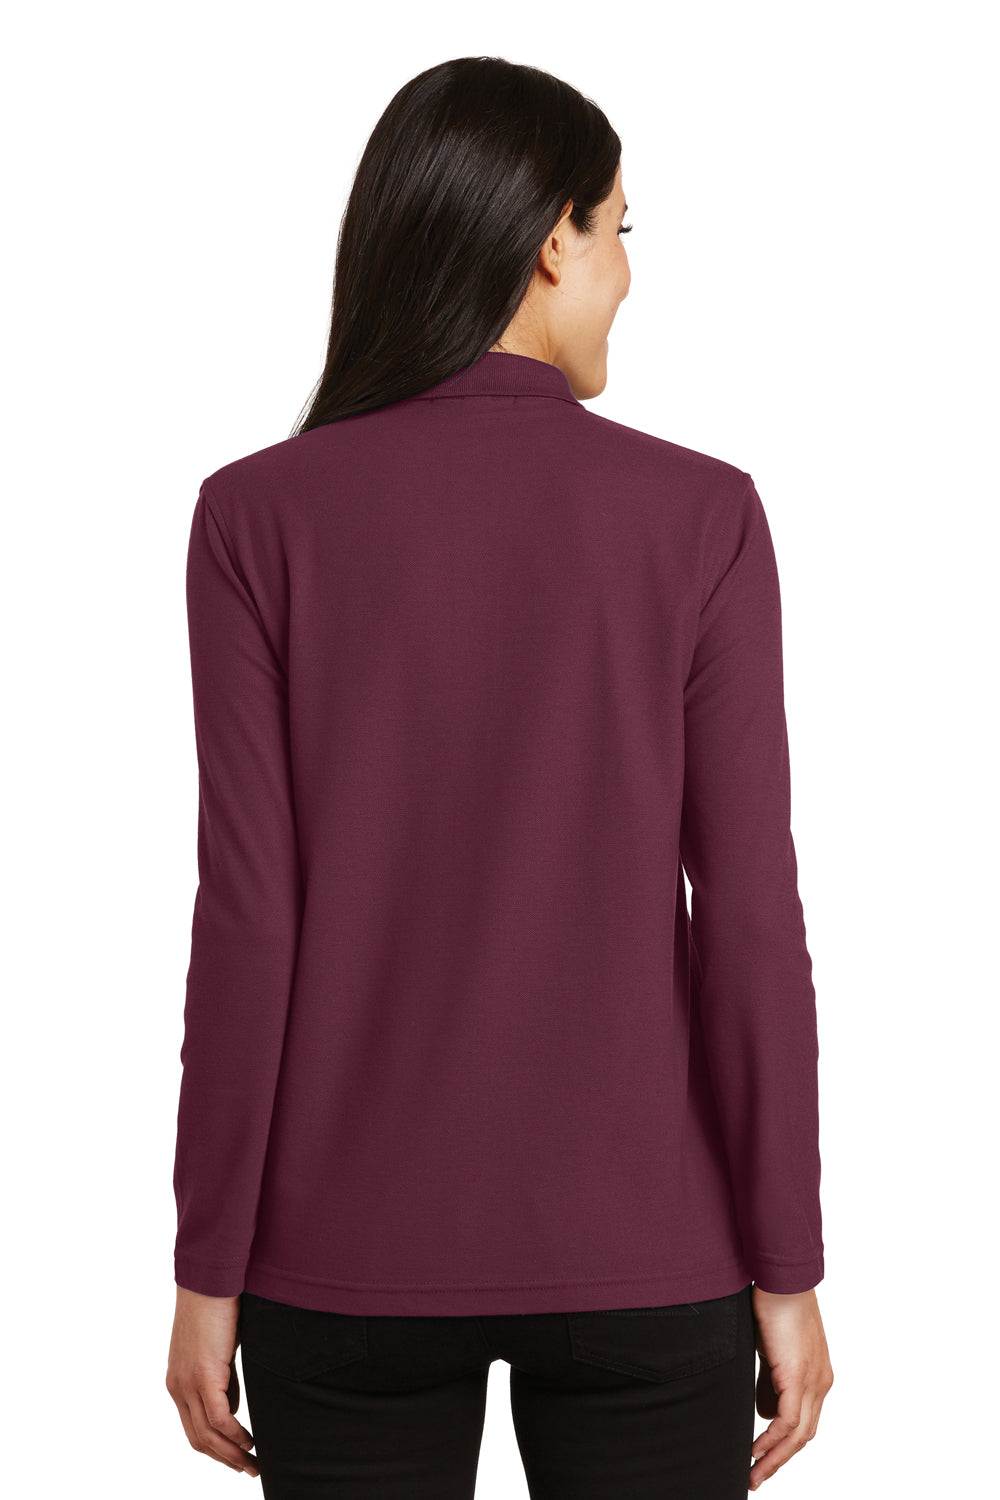 Port Authority L500LS Womens Silk Touch Wrinkle Resistant Long Sleeve Polo Shirt Burgundy Back